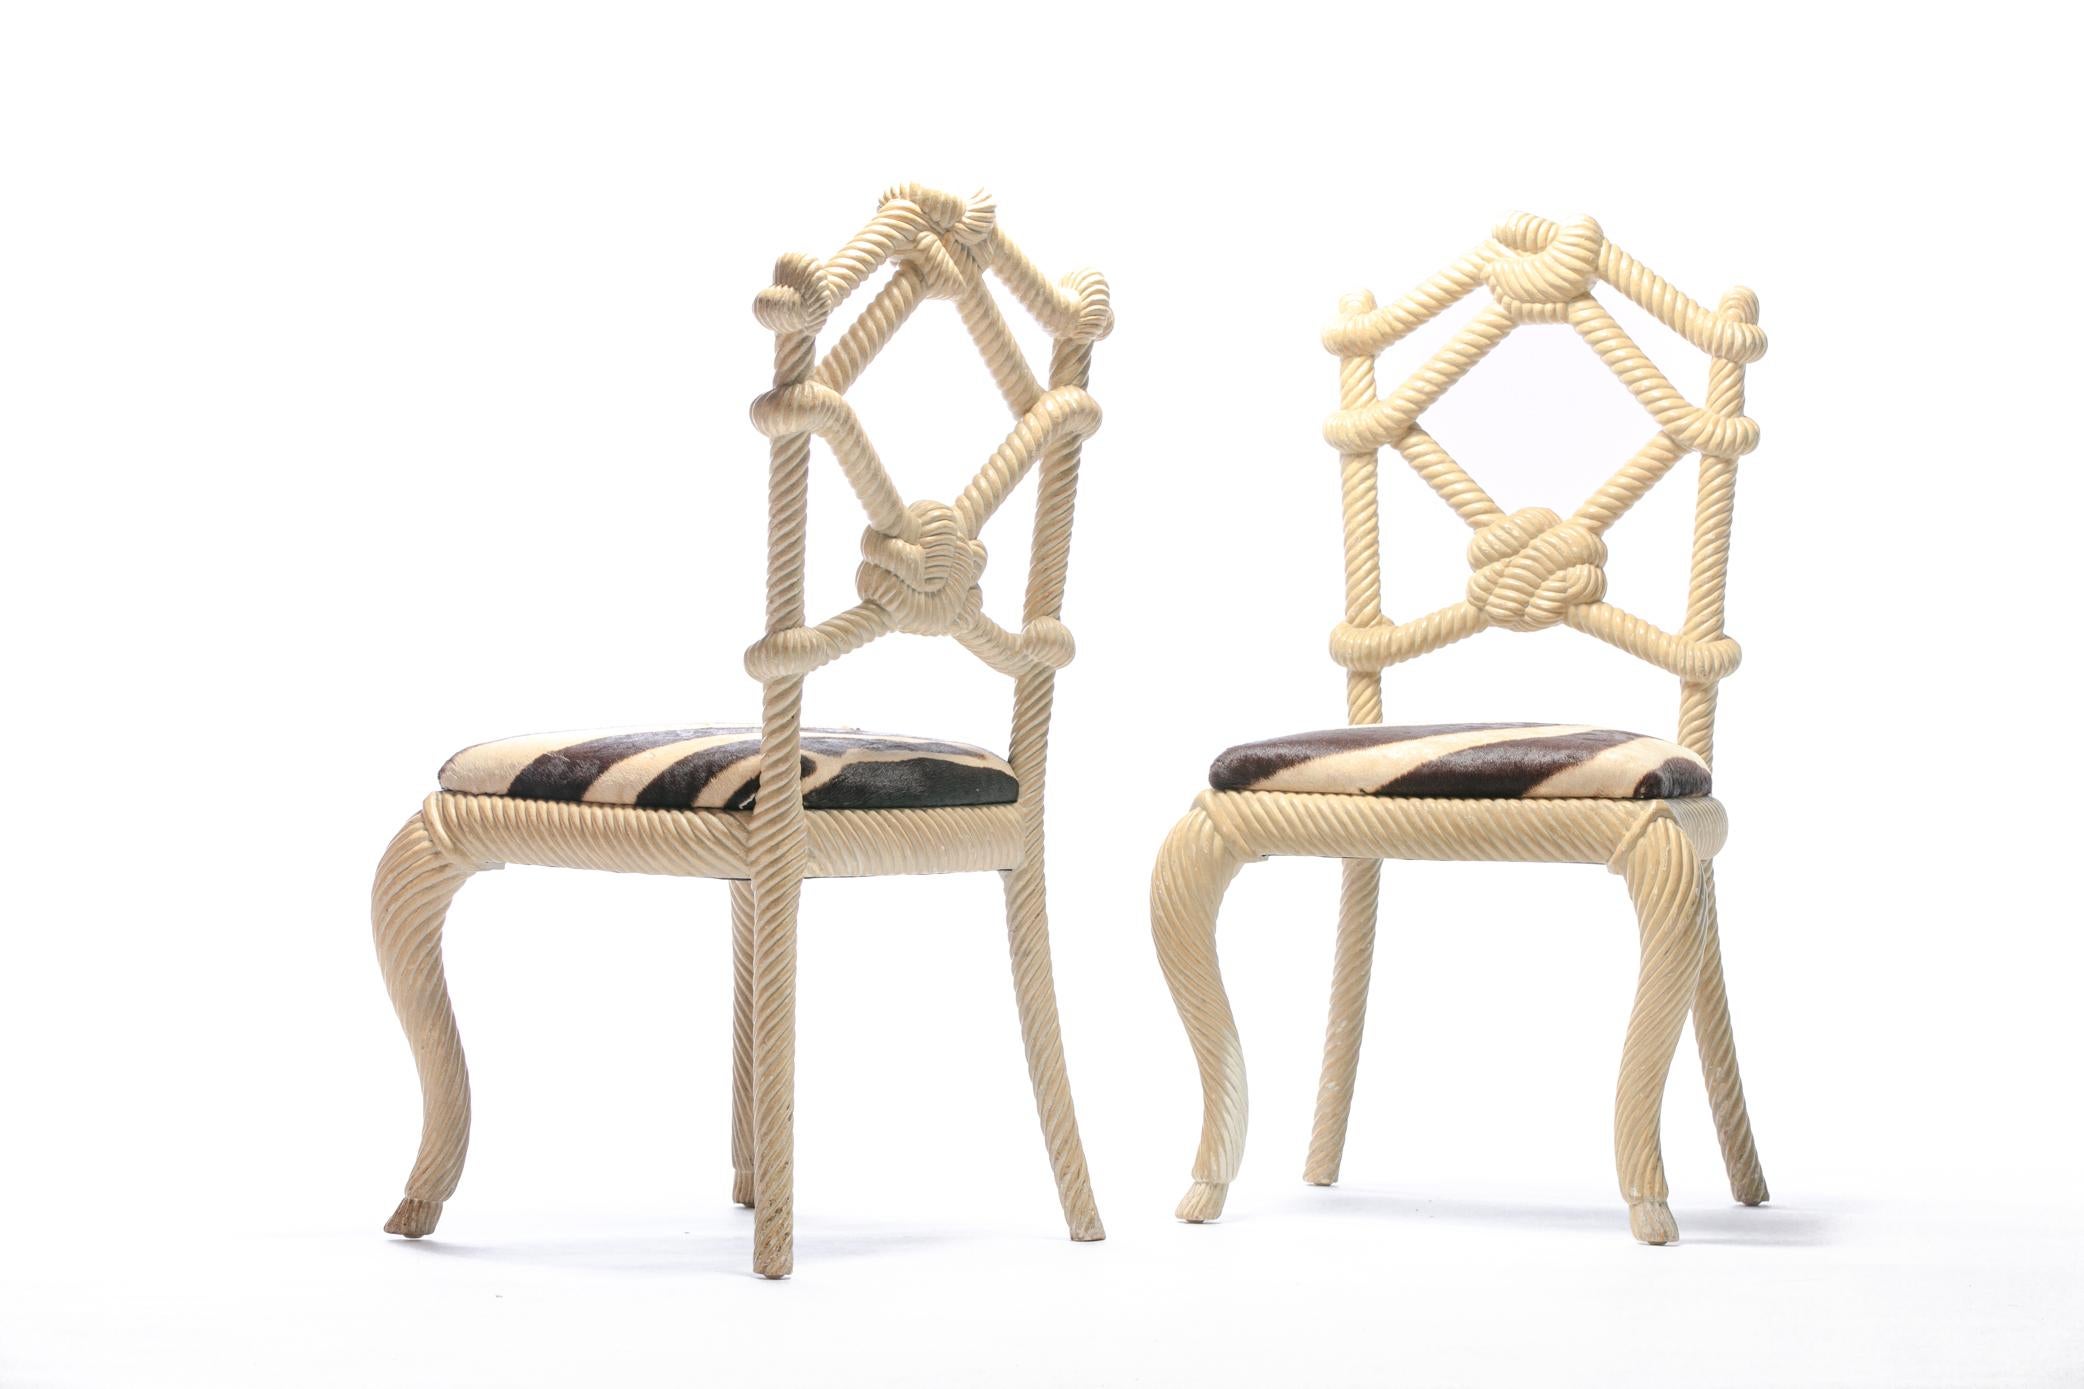 Whimsy and fantasy unite in this stunning pair of carved wood nautical rope form chairs freshly reupholstered in zebra hide. These rope chairs were selected by Interior Designer Kelly Wearstler for her project - Viceroy Miami, circa 2008. High